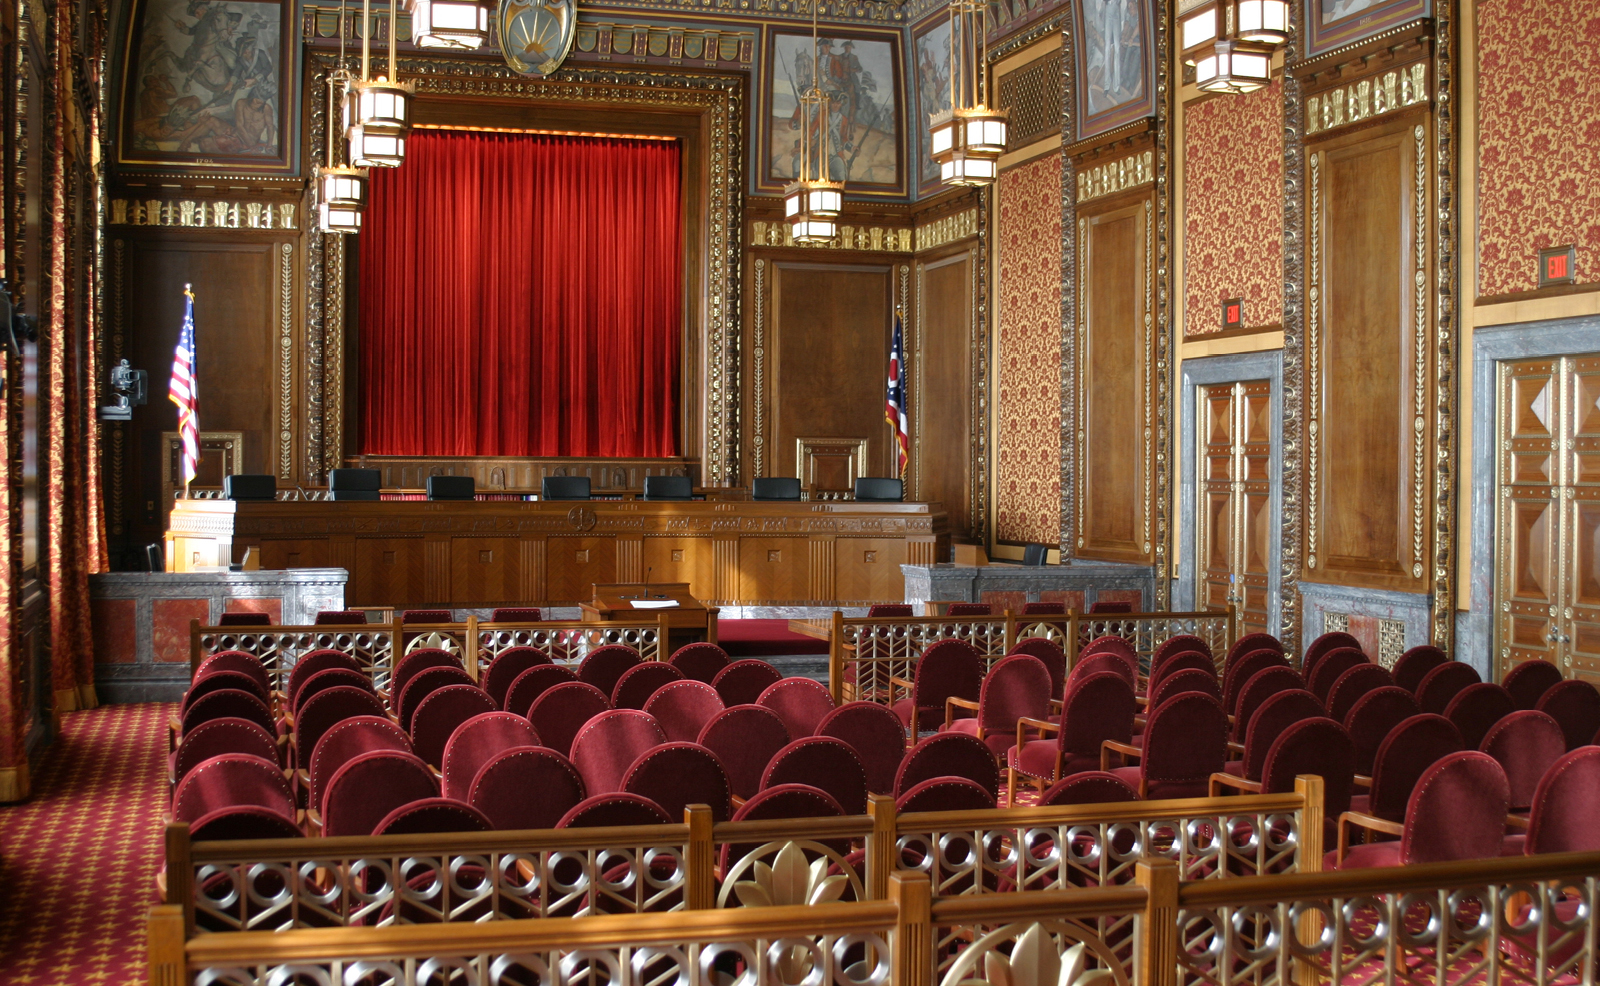 Image the courtroom in the Thomas J. Moyer Ohio Judicial Center